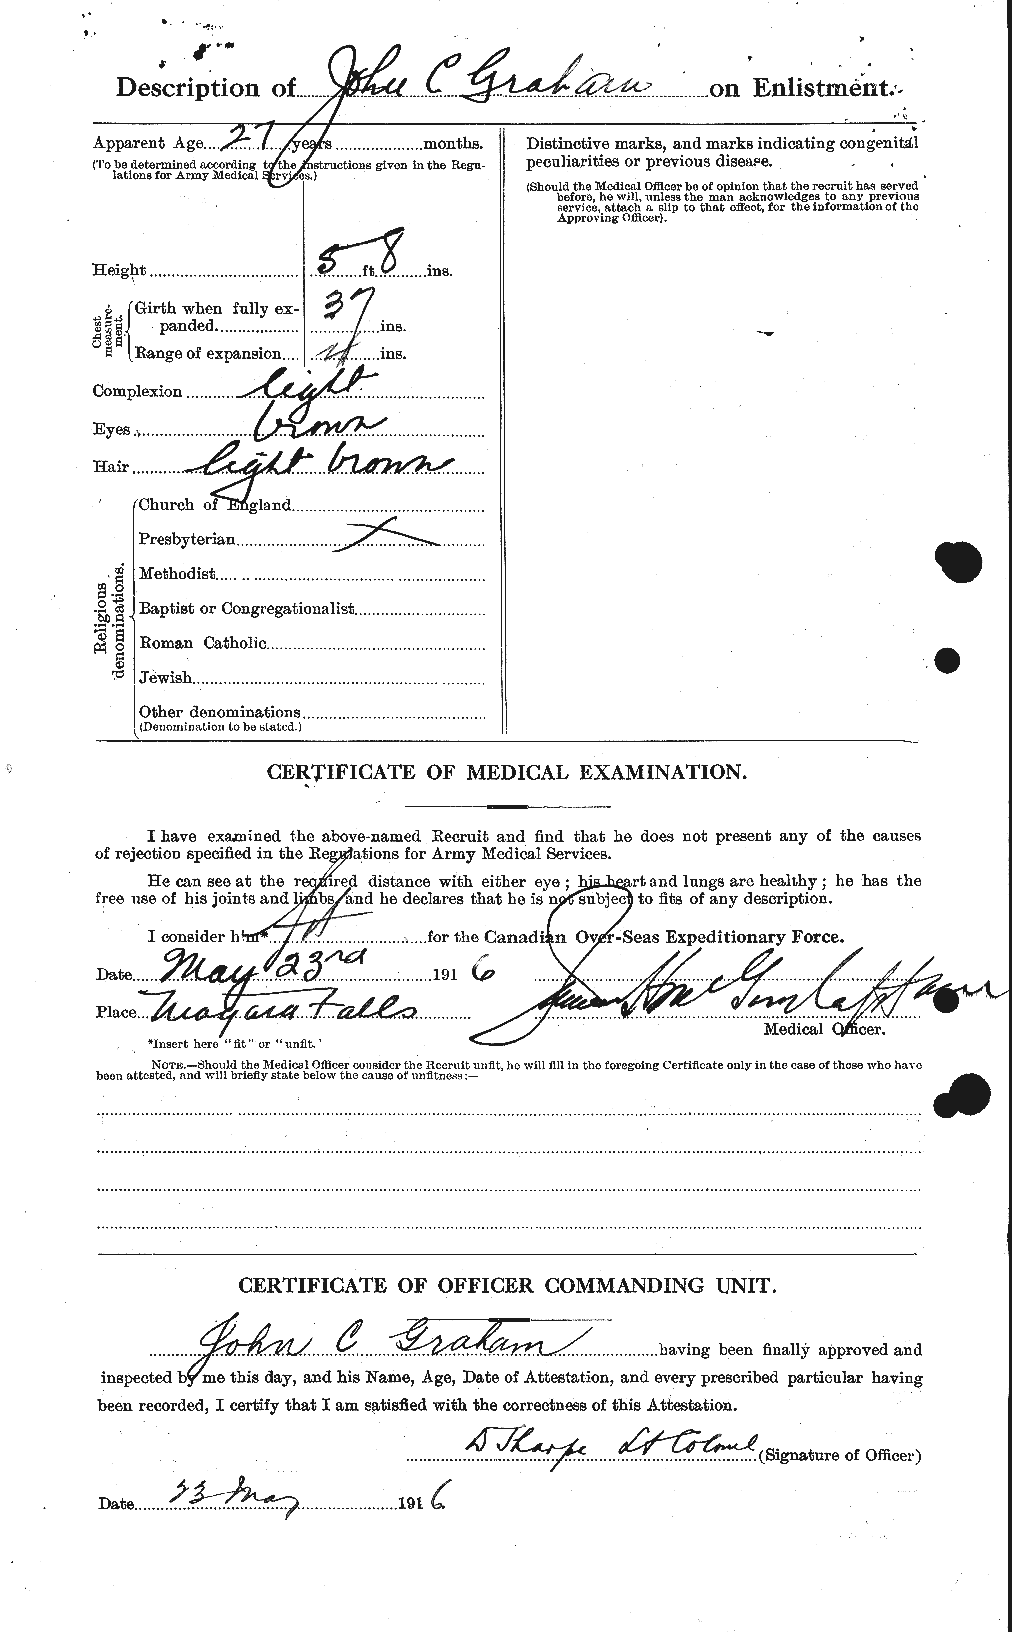 Personnel Records of the First World War - CEF 359160b